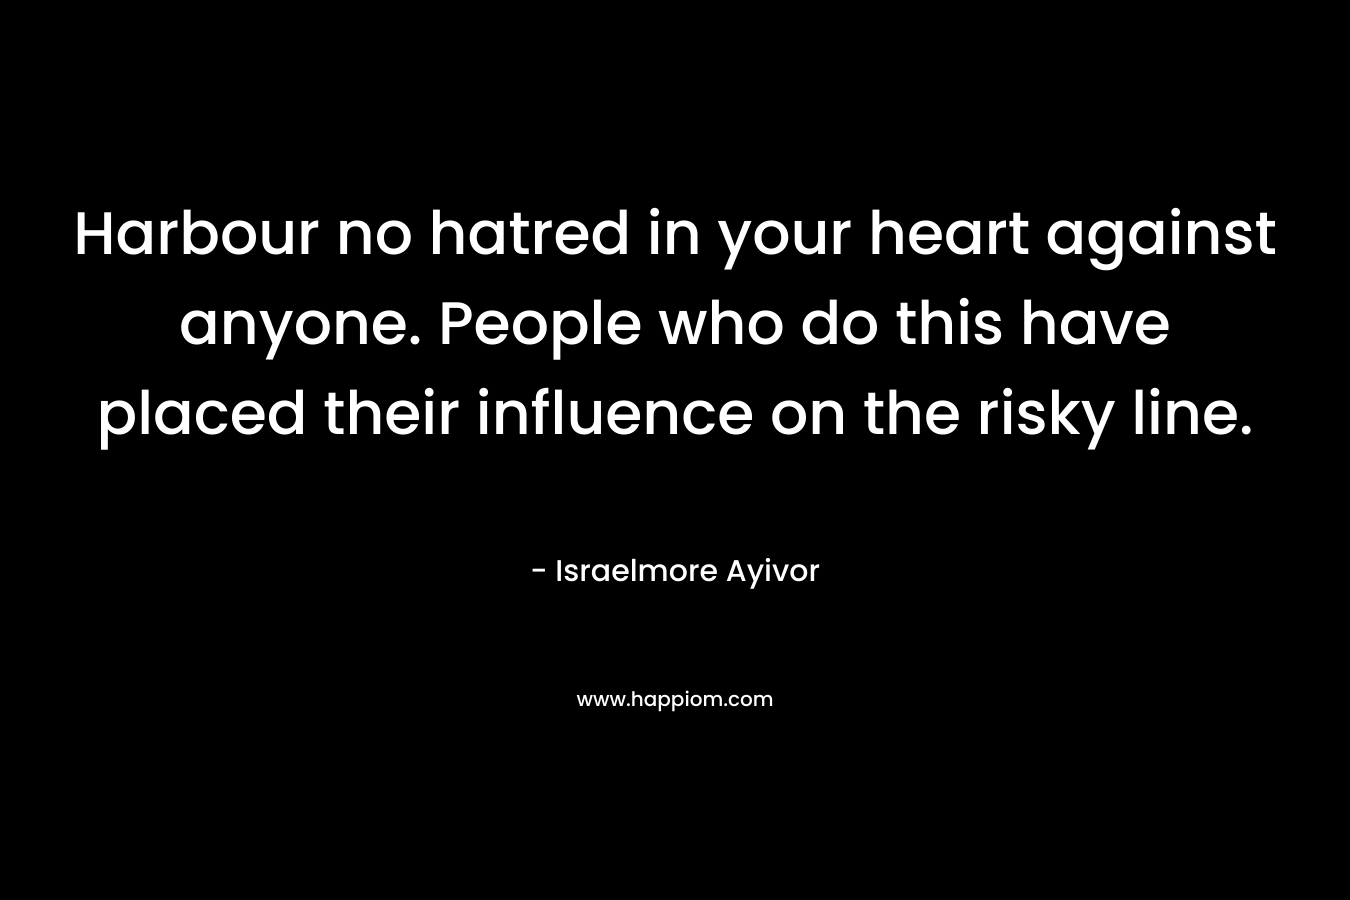 Harbour no hatred in your heart against anyone. People who do this have placed their influence on the risky line.